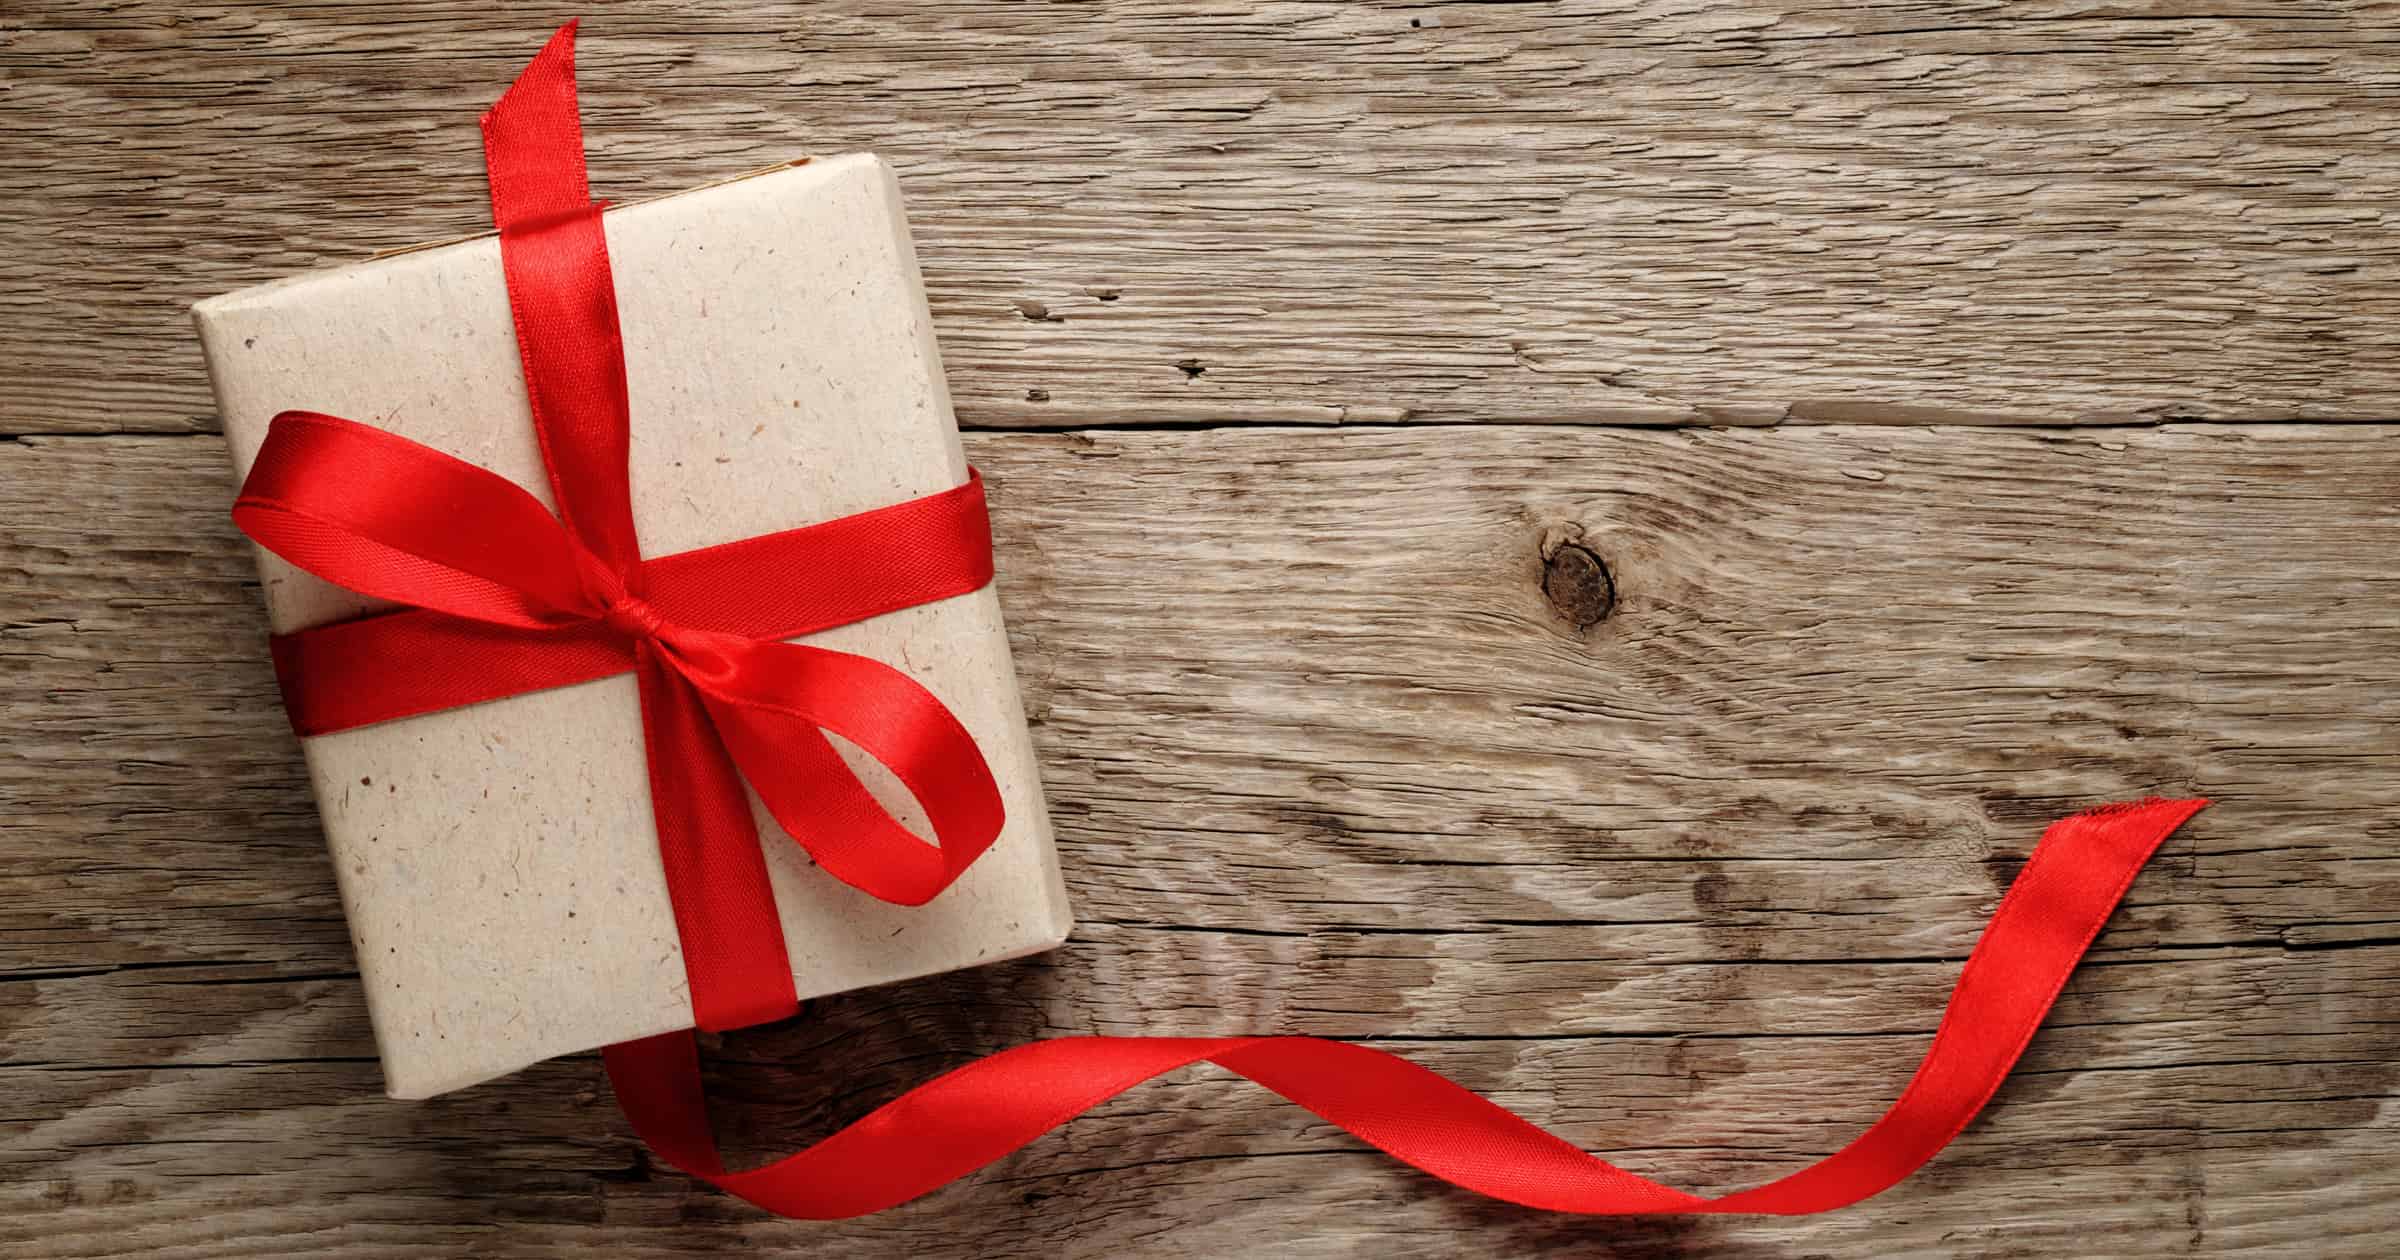 Gift box with red bow on wood background